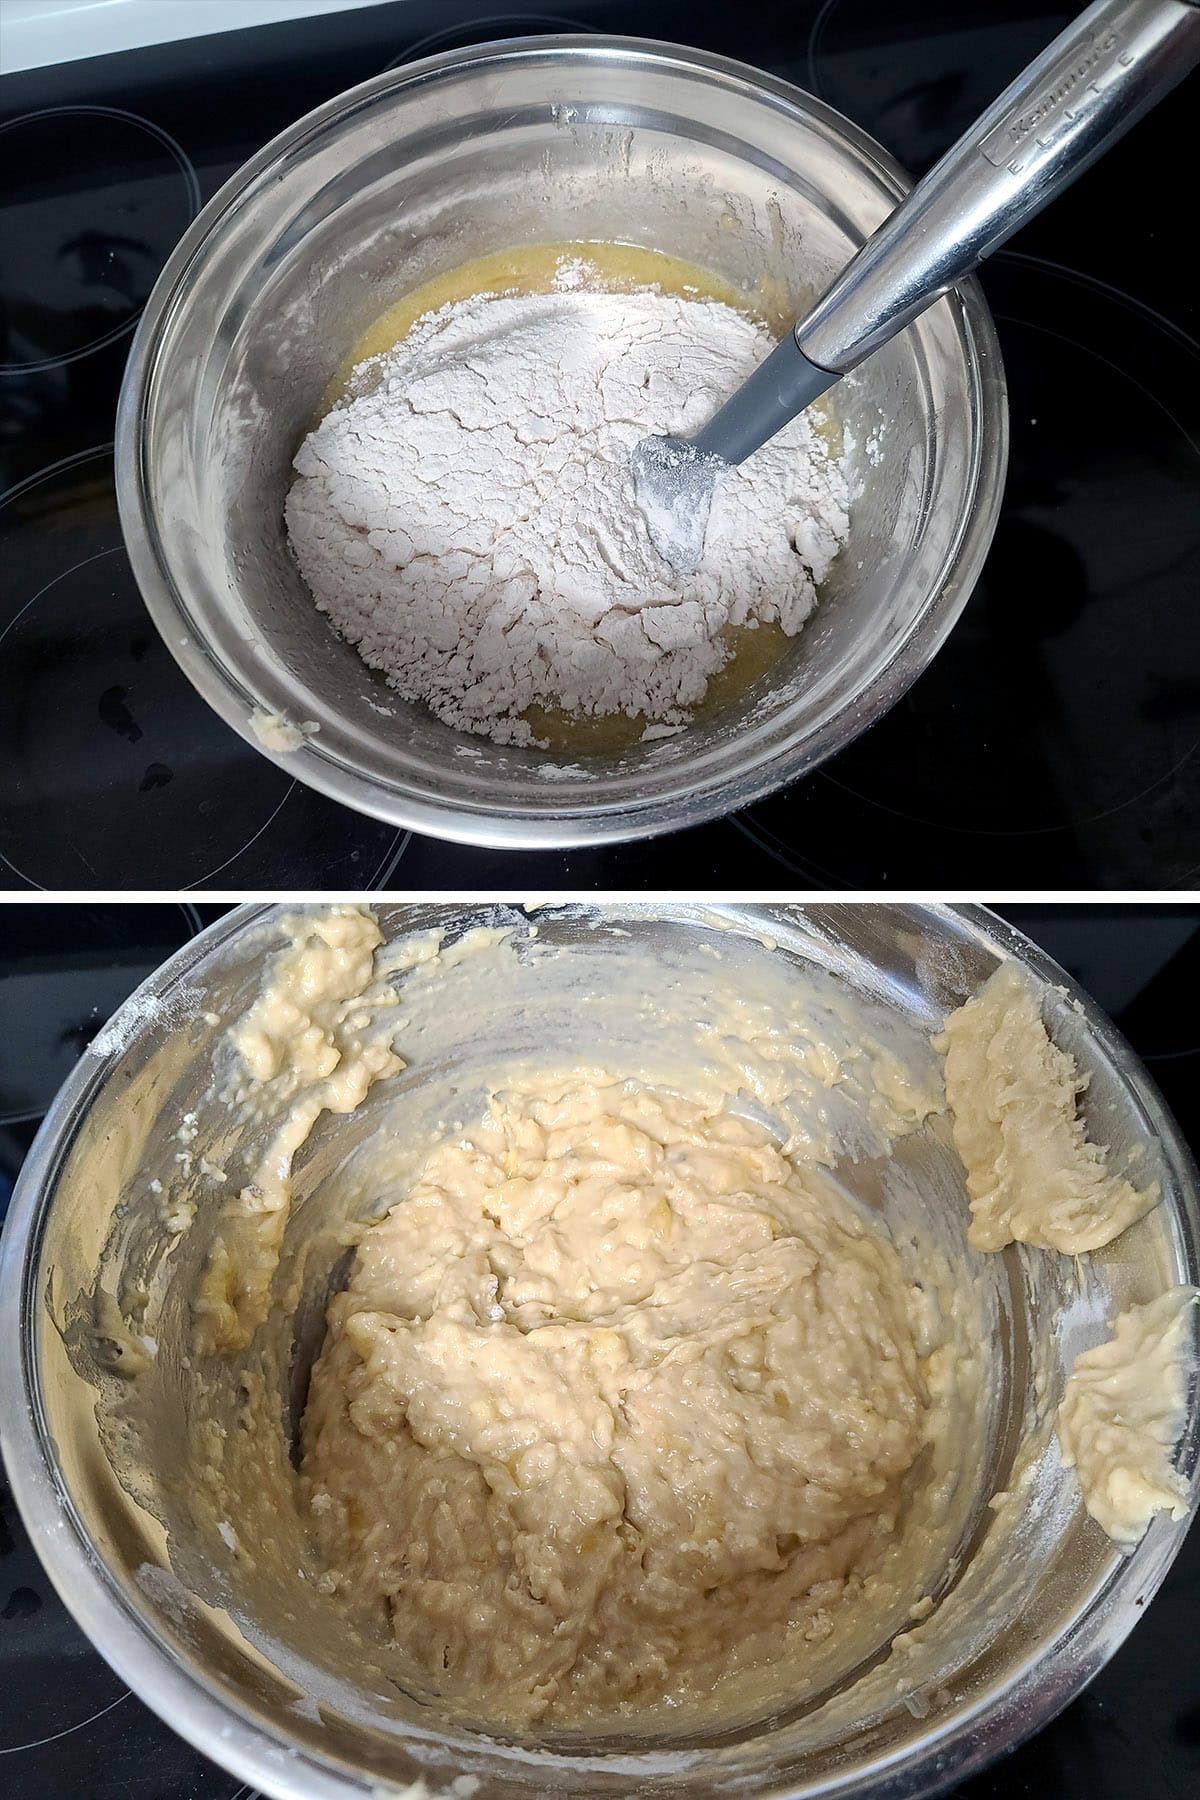 A 2 part image showing the dry ingredients being added to the bowl of wet ingredients and mixed in.